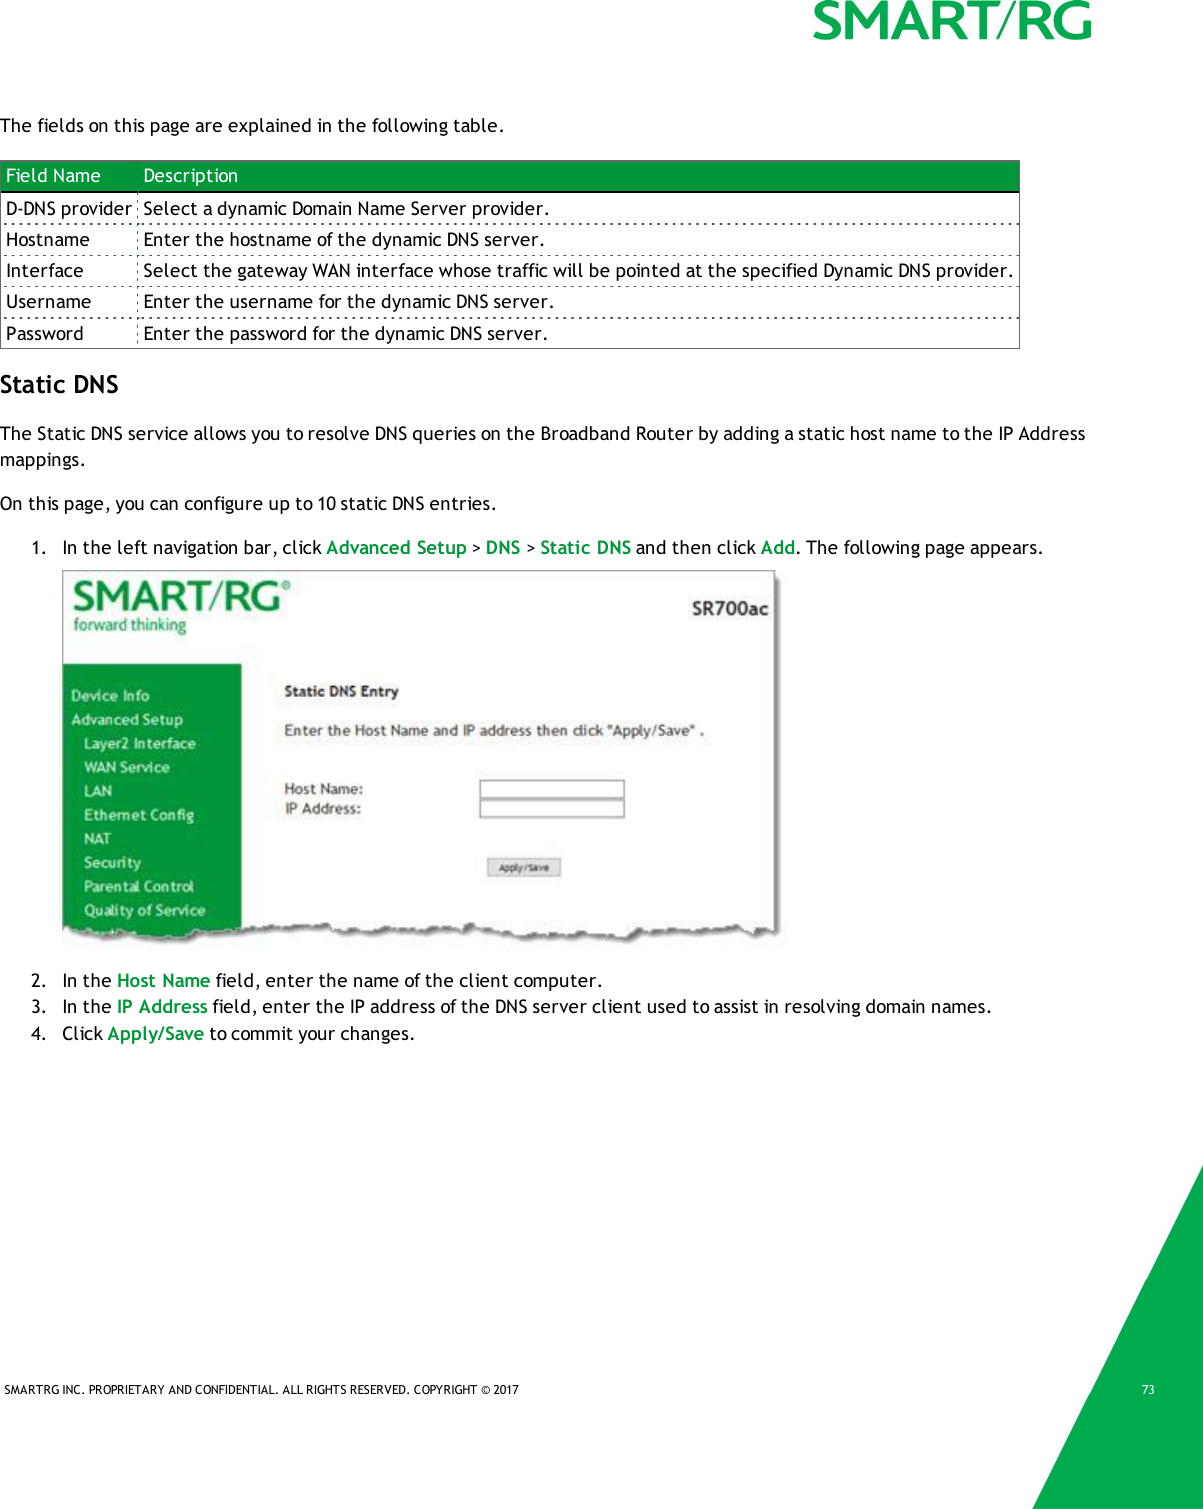 SMARTRG INC. PROPRIETARY AND CONFIDENTIAL. ALL RIGHTS RESERVED. COPYRIGHT © 2017 73The fields on this page are explained in the following table.Field Name DescriptionD-DNS provider Select a dynamic Domain Name Server provider.Hostname Enter the hostname of the dynamic DNS server.Interface Select the gateway WAN interface whose traffic will be pointed at the specified Dynamic DNS provider.Username Enter the username for the dynamic DNS server.Password Enter the password for the dynamic DNS server.Static DNSThe Static DNS service allows you to resolve DNS queries on the Broadband Router by adding a static host name to the IP Addressmappings.On this page, you can configure up to 10 static DNS entries.1. In the left navigation bar, click Advanced Setup &gt;DNS &gt;Static DNS and then click Add. The following page appears.2. In the Host Name field, enter the name of the client computer.3. In the IP Address field, enter the IP address of the DNS server client used to assist in resolving domain names.4. Click Apply/Save to commit your changes.